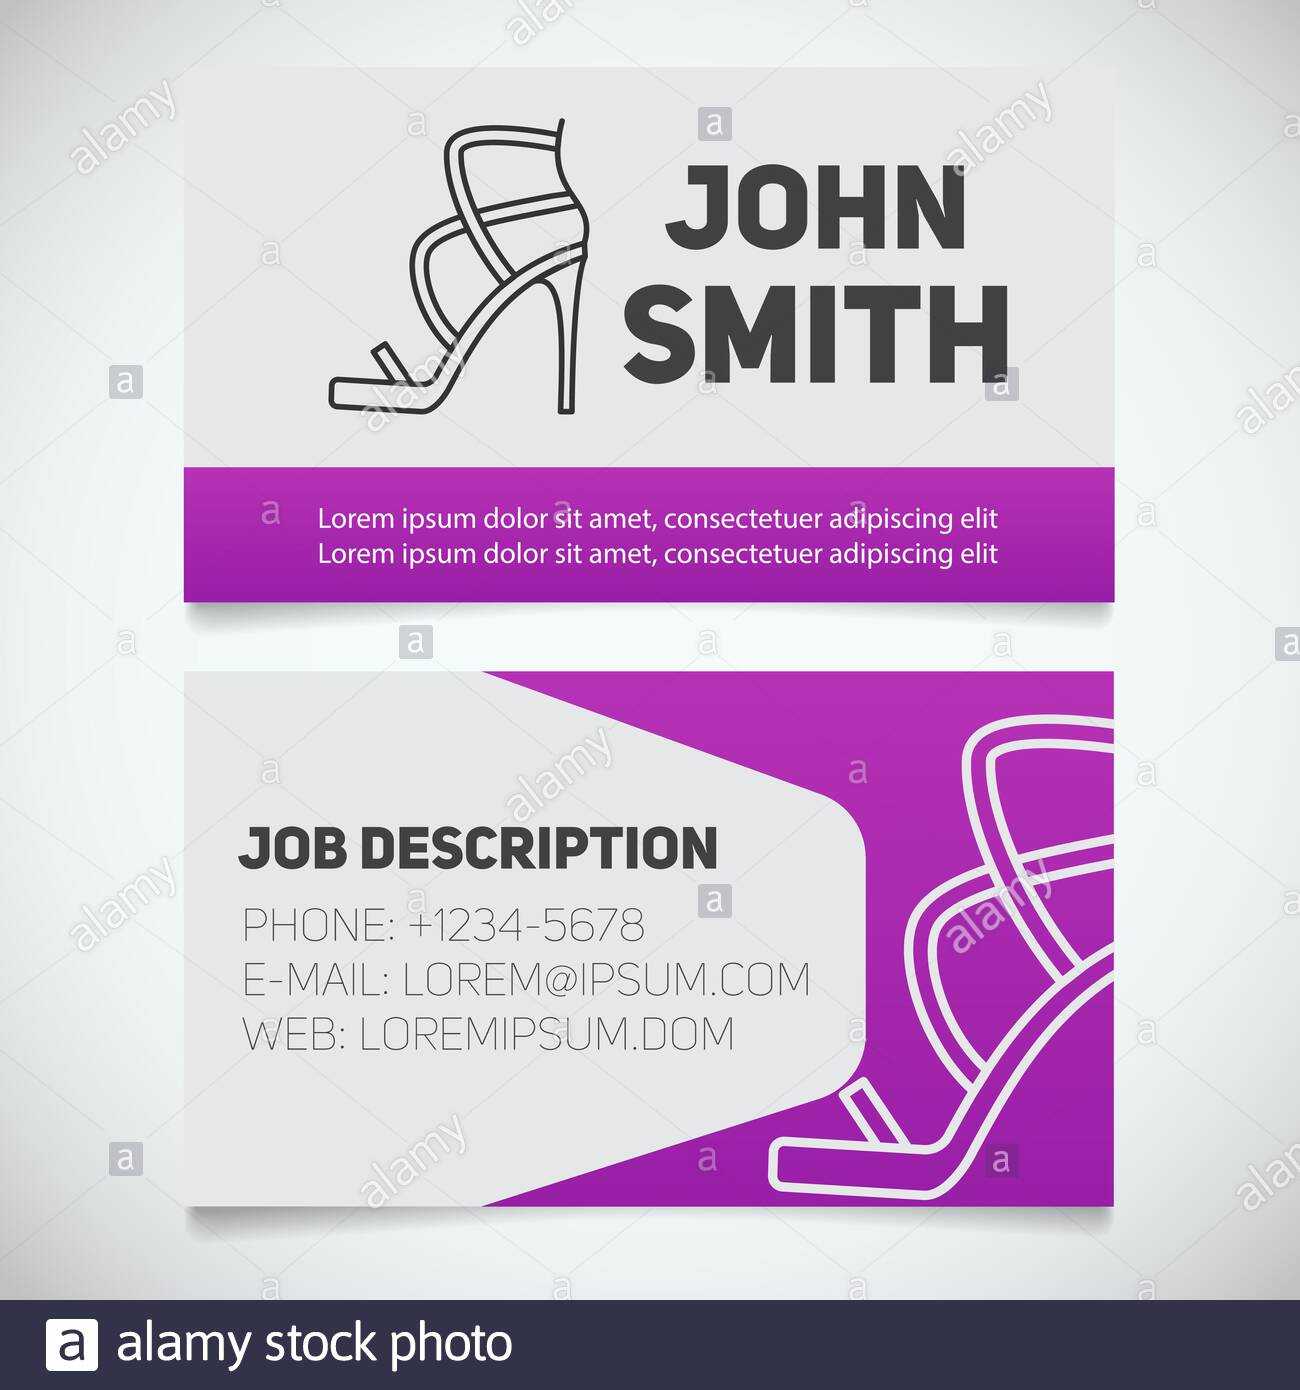 Business Card Print Template With High Heel Shoe Logo Pertaining To High Heel Shoe Template For Card